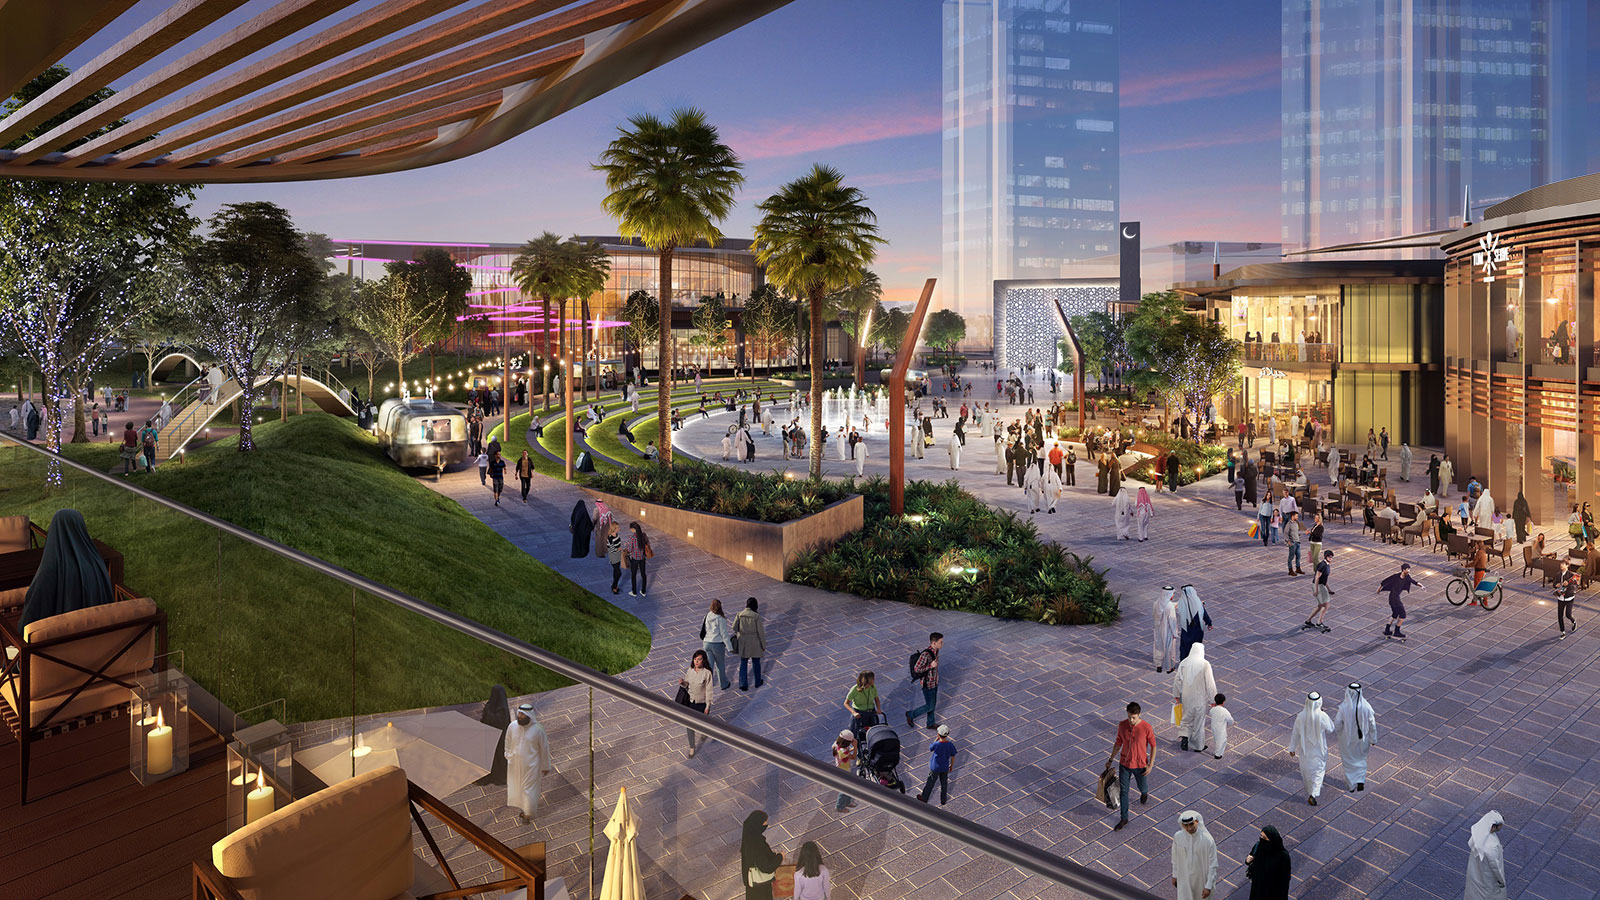 Abu Dhabi, UAE: 17 February 2019 – IMKAN, the globally reputed property developer renowned for creating soulful places that enrich people’s lives, is inviting investors and businesses to explore the leasing and investment opportunities that will be available in Sheikha Fatima Park. Hand-in-hand with its strategic partner, Abu Dhabi Municipality, IMKAN is developing the inner-city community green space in Khalidiya district. The redesign is set to transform the area into a dynamic destination for all ages; while becoming Abu Dhabi’s premier urban park with open-air leisure and entertainment. In alignment with the Abu Dhabi Economic Vision 2030, which outlines a strategy for reduced reliance on the oil sector as a key source of economic activity over time, IMKAN is focused on strengthening the Emirate’s economic vision and in solidifying its footing as the region’s investment haven. Abu Dhabi is a world-class investment destination, offering a promising value proposition to businesses and investors alike with attractive returns and yields. The park encompasses an area of 46,000m2, which is inclusive of an adventure zone, and a section devoted to women and children. The project’s timely commencement coincides with regional and global businesses increasingly looking towards Abu Dhabi for stronger investment opportunities. The Park is strategically located at the corner of Al Bateen Street and Zayed the First Street, offering close to 10,000sqm of leasable space for businesses to provide their unique services in a picturesque setting. Avenues for collaboration and investments are available in commercial, retail and leisure segments. Food & beverage units, offices and clinics are designed with the flexibility to expand and with the option of having terraces surrounded by park vistas and overlooking event plazas, green activity spaces and tranquil open lawns. By using IMKAN’s unique approach to community building and an emphasis on encouraging active wellness, Sheikha Fatima Park will provide a trendy urban walkable environment catering to co-worker office spaces, sports and wellness facilities, outdoor event concepts and leisure activities. Additionally, the park will be a draw for families and members of a long-standing community who will return to the park to explore the varied new attractions and events hosted there, including pop-up movie screenings, yoga and Pilates’ classes and art fairs to name a few. Walid El-Hindi, Chief Executive Officer of IMKAN, said: “Sheikha Fatima Park will not only benefit the physical health and wellness of this community, it is also a platform for businesses. We will be considering offers from groups that complement our ethos of creating soulful places that enrich people’s lives. Our research-led approach has enabled us to develop the ideal urban green space that will focus on promoting mental, physical and spiritual health equity, and we want the outlets who operate in Sheikha Fatima Park to promote these values.” He added, “It is also a great opportunity for start-ups and SMEs seeking flagship market positioning - it's all part of revitalizing the community with what will be a robust center of activity. We encourage local regional and global businesses to join us on our journey and be a part of this story." Construction at site is led by Al Fara’a Engineering, one of the most established groups in the region. The project is also supported by Arcadis; a leading multinational cost and project management consultancy firm, along with Cracknell, the globally renowned landscape design solutions provider. With the aid of these partners, Sheikha Fatima Park is well underway and on track for completion in Q4 2019. As the market’s research-based place-maker, IMKAN is creating yet another destination with the redevelopment of Sheikha Fatima Park that shall serve as a cornerstone of open-air urban activity in Abu Dhabi offering community engagement for all. Local, regional and global potential investors can visit www.imkan.ae/sheikha-fatima-park for more information, or reach out to IMKAN team on hello@imkan.ae